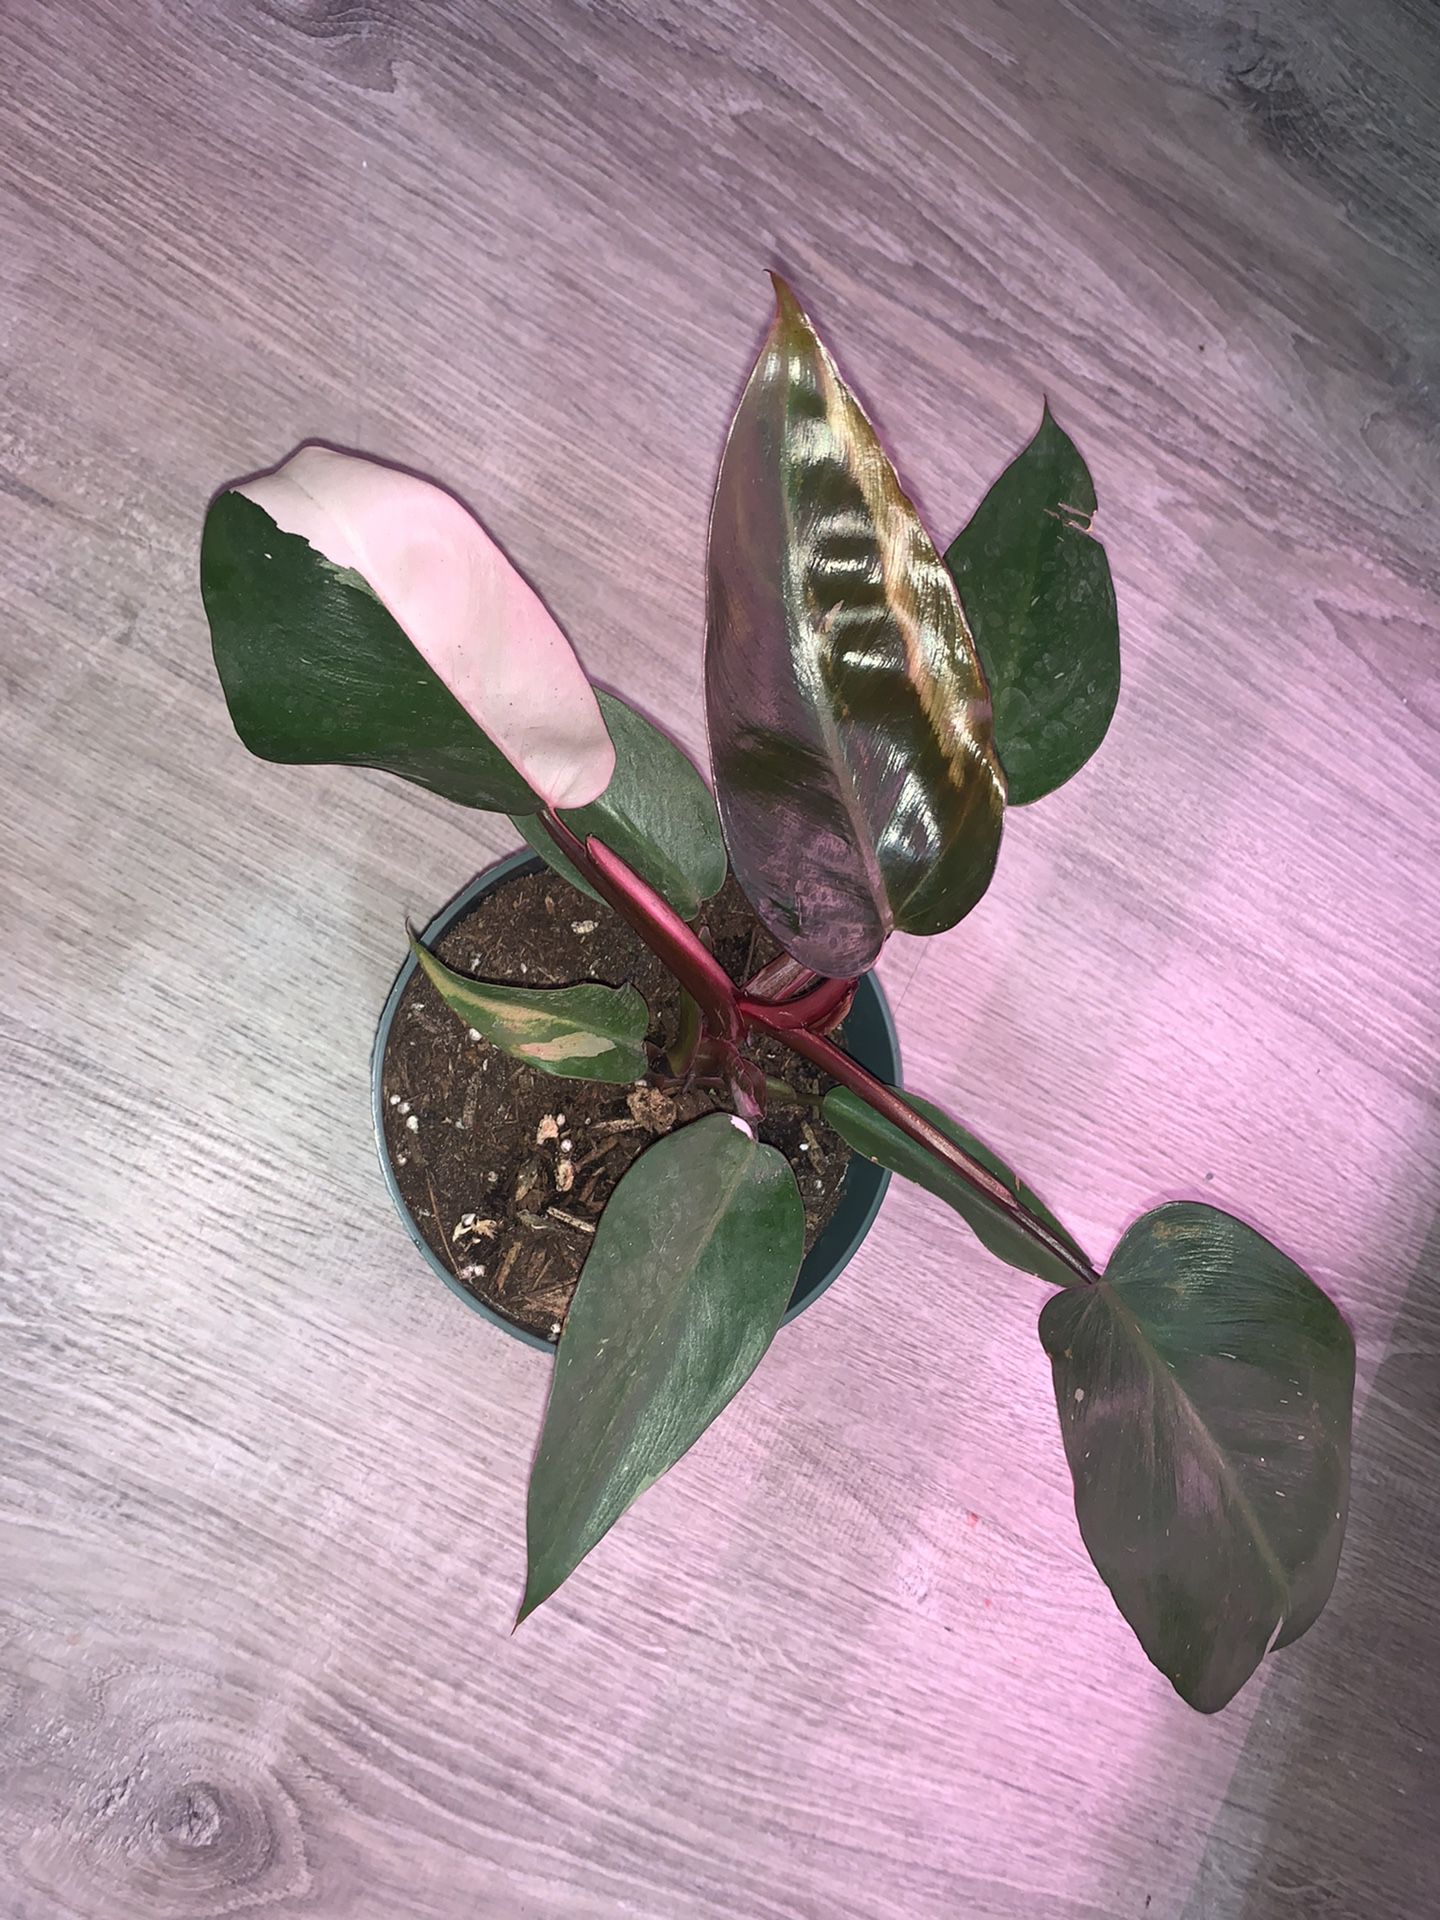 Pink Princess Philodendron with new growth